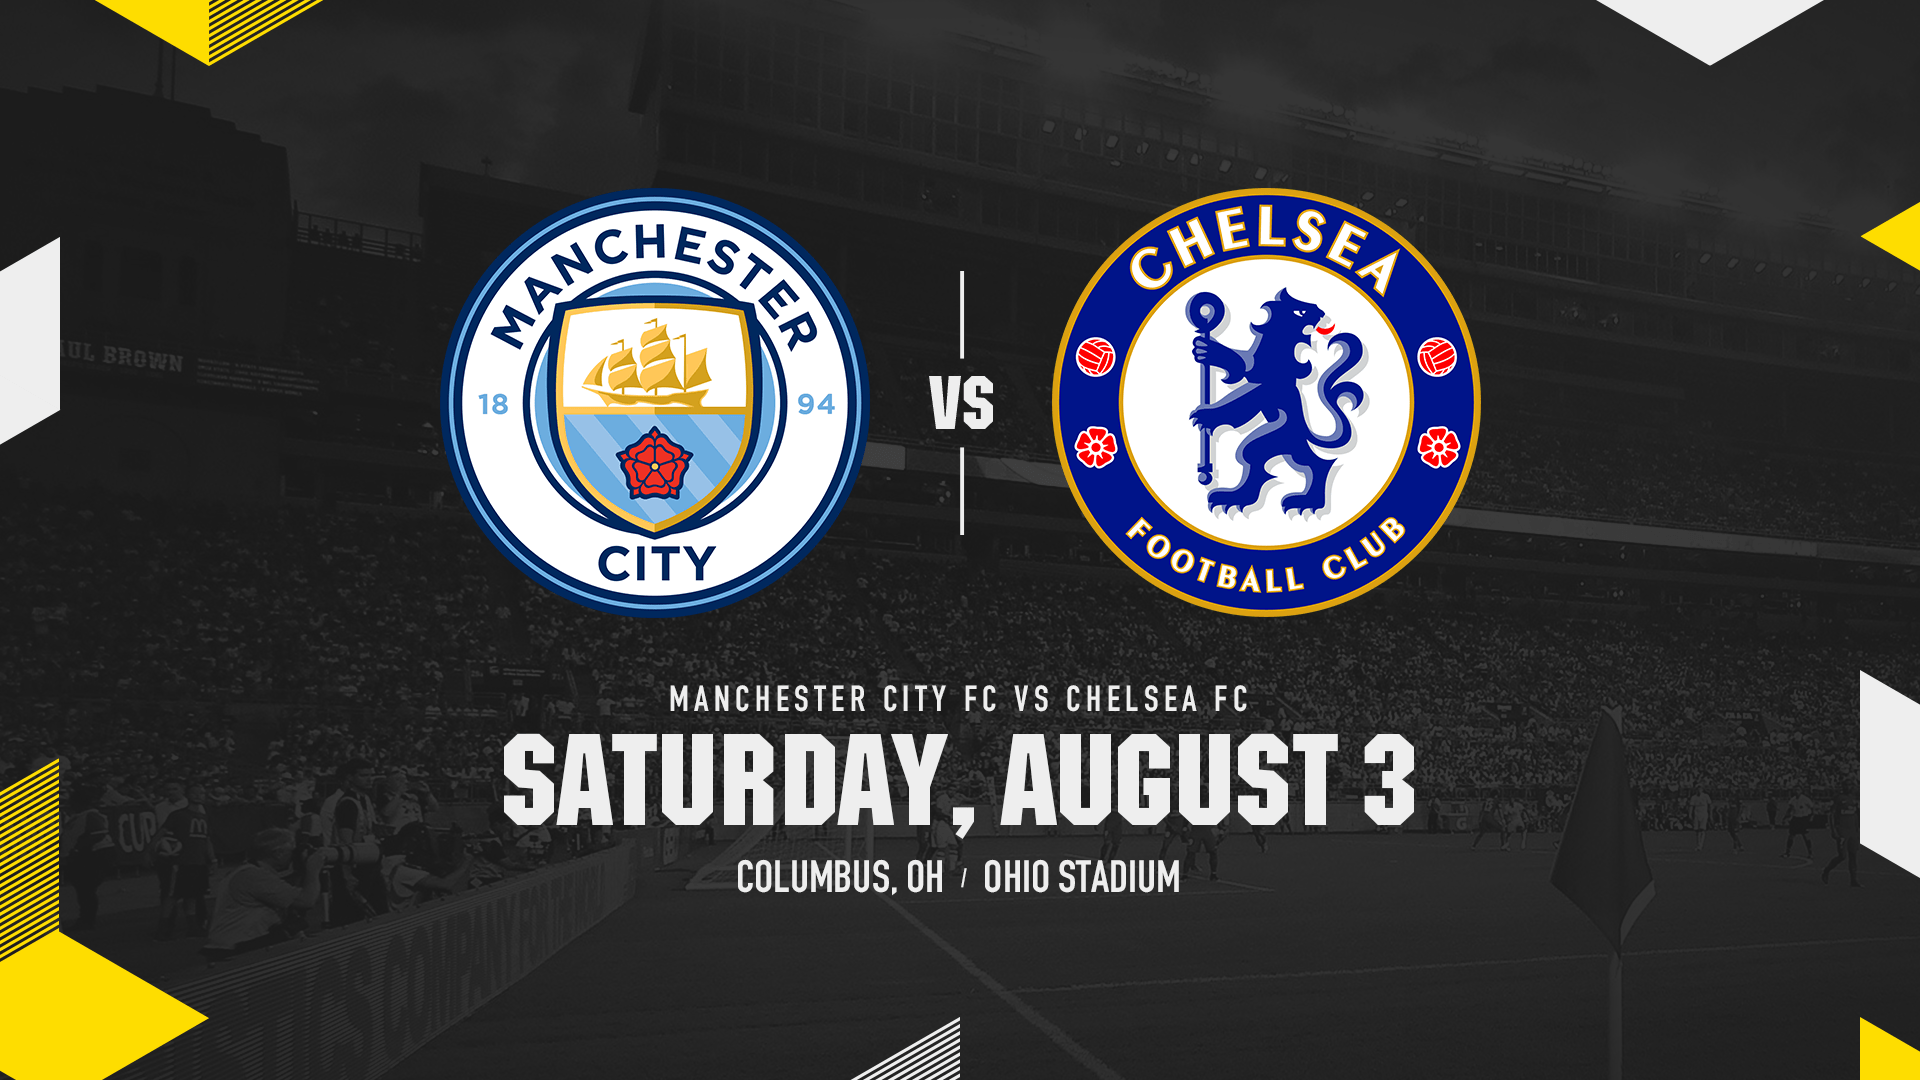 INTERNATIONAL SOCCER CLUBS CHELSEA FC AND MANCHESTER CITY TO MEET IN OHIO STADIUM AUGUST 3  | Columbus Crew